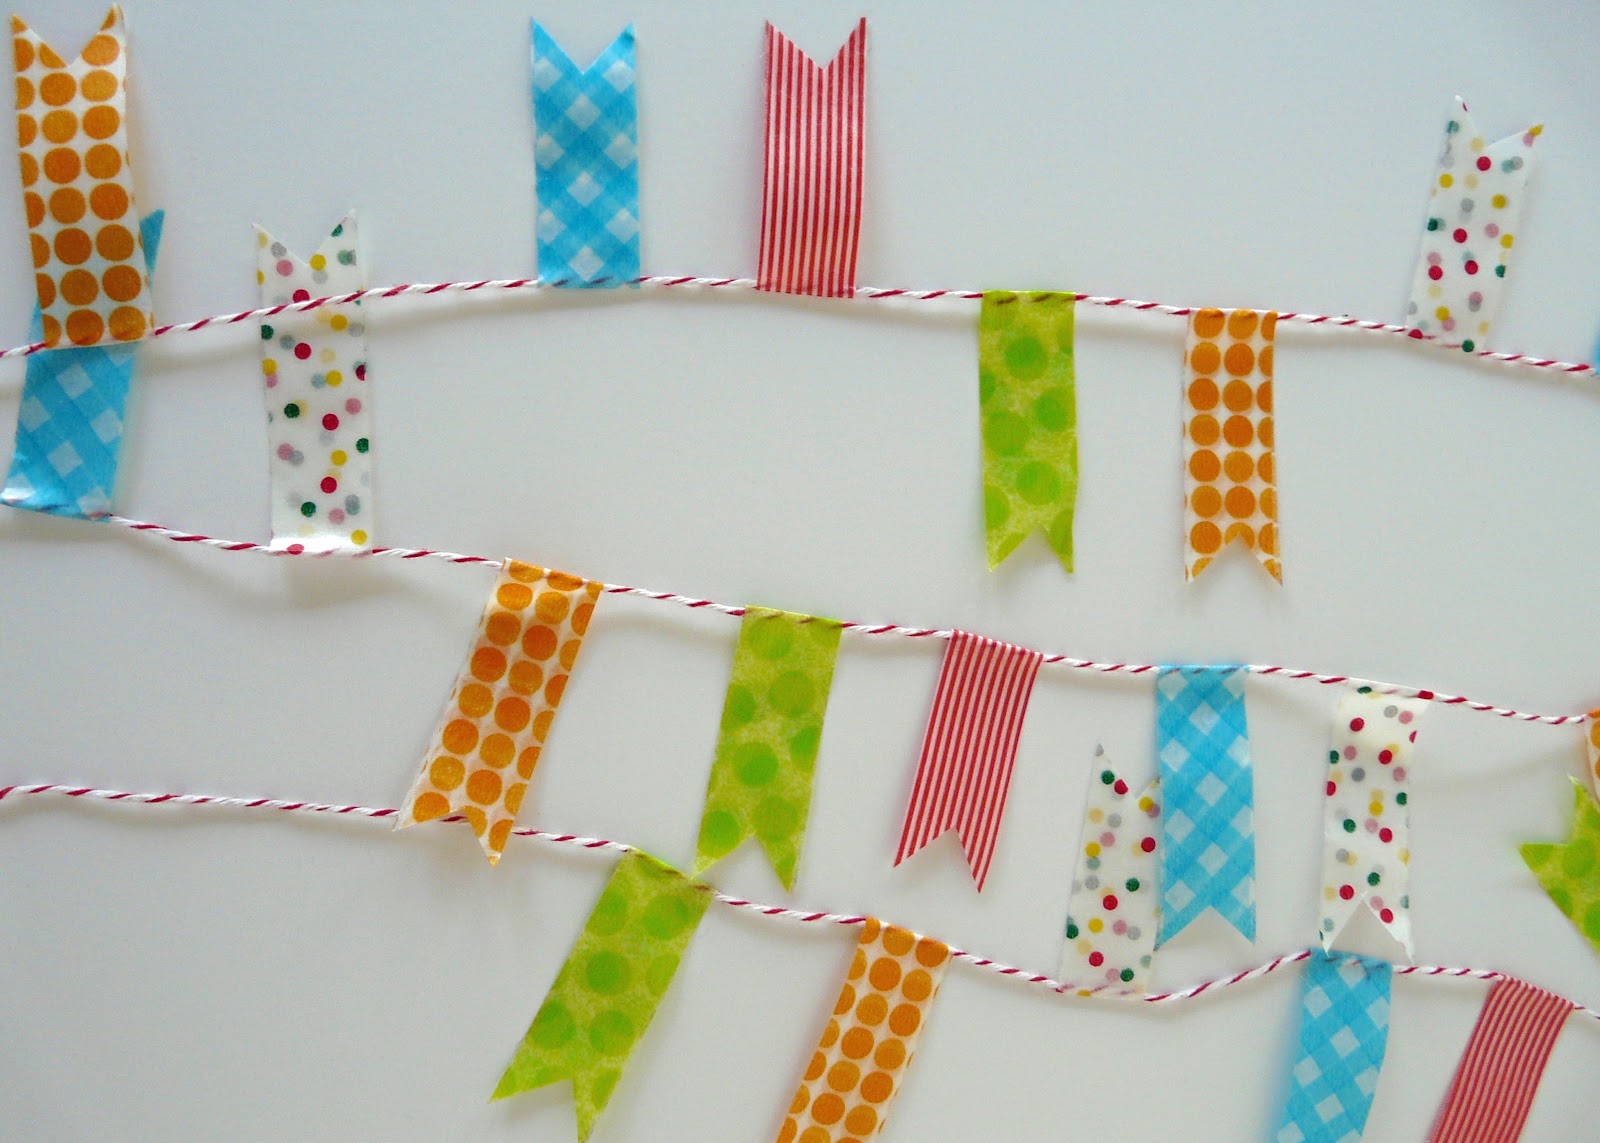  Party  Washi Tape  Decorations  Part 2